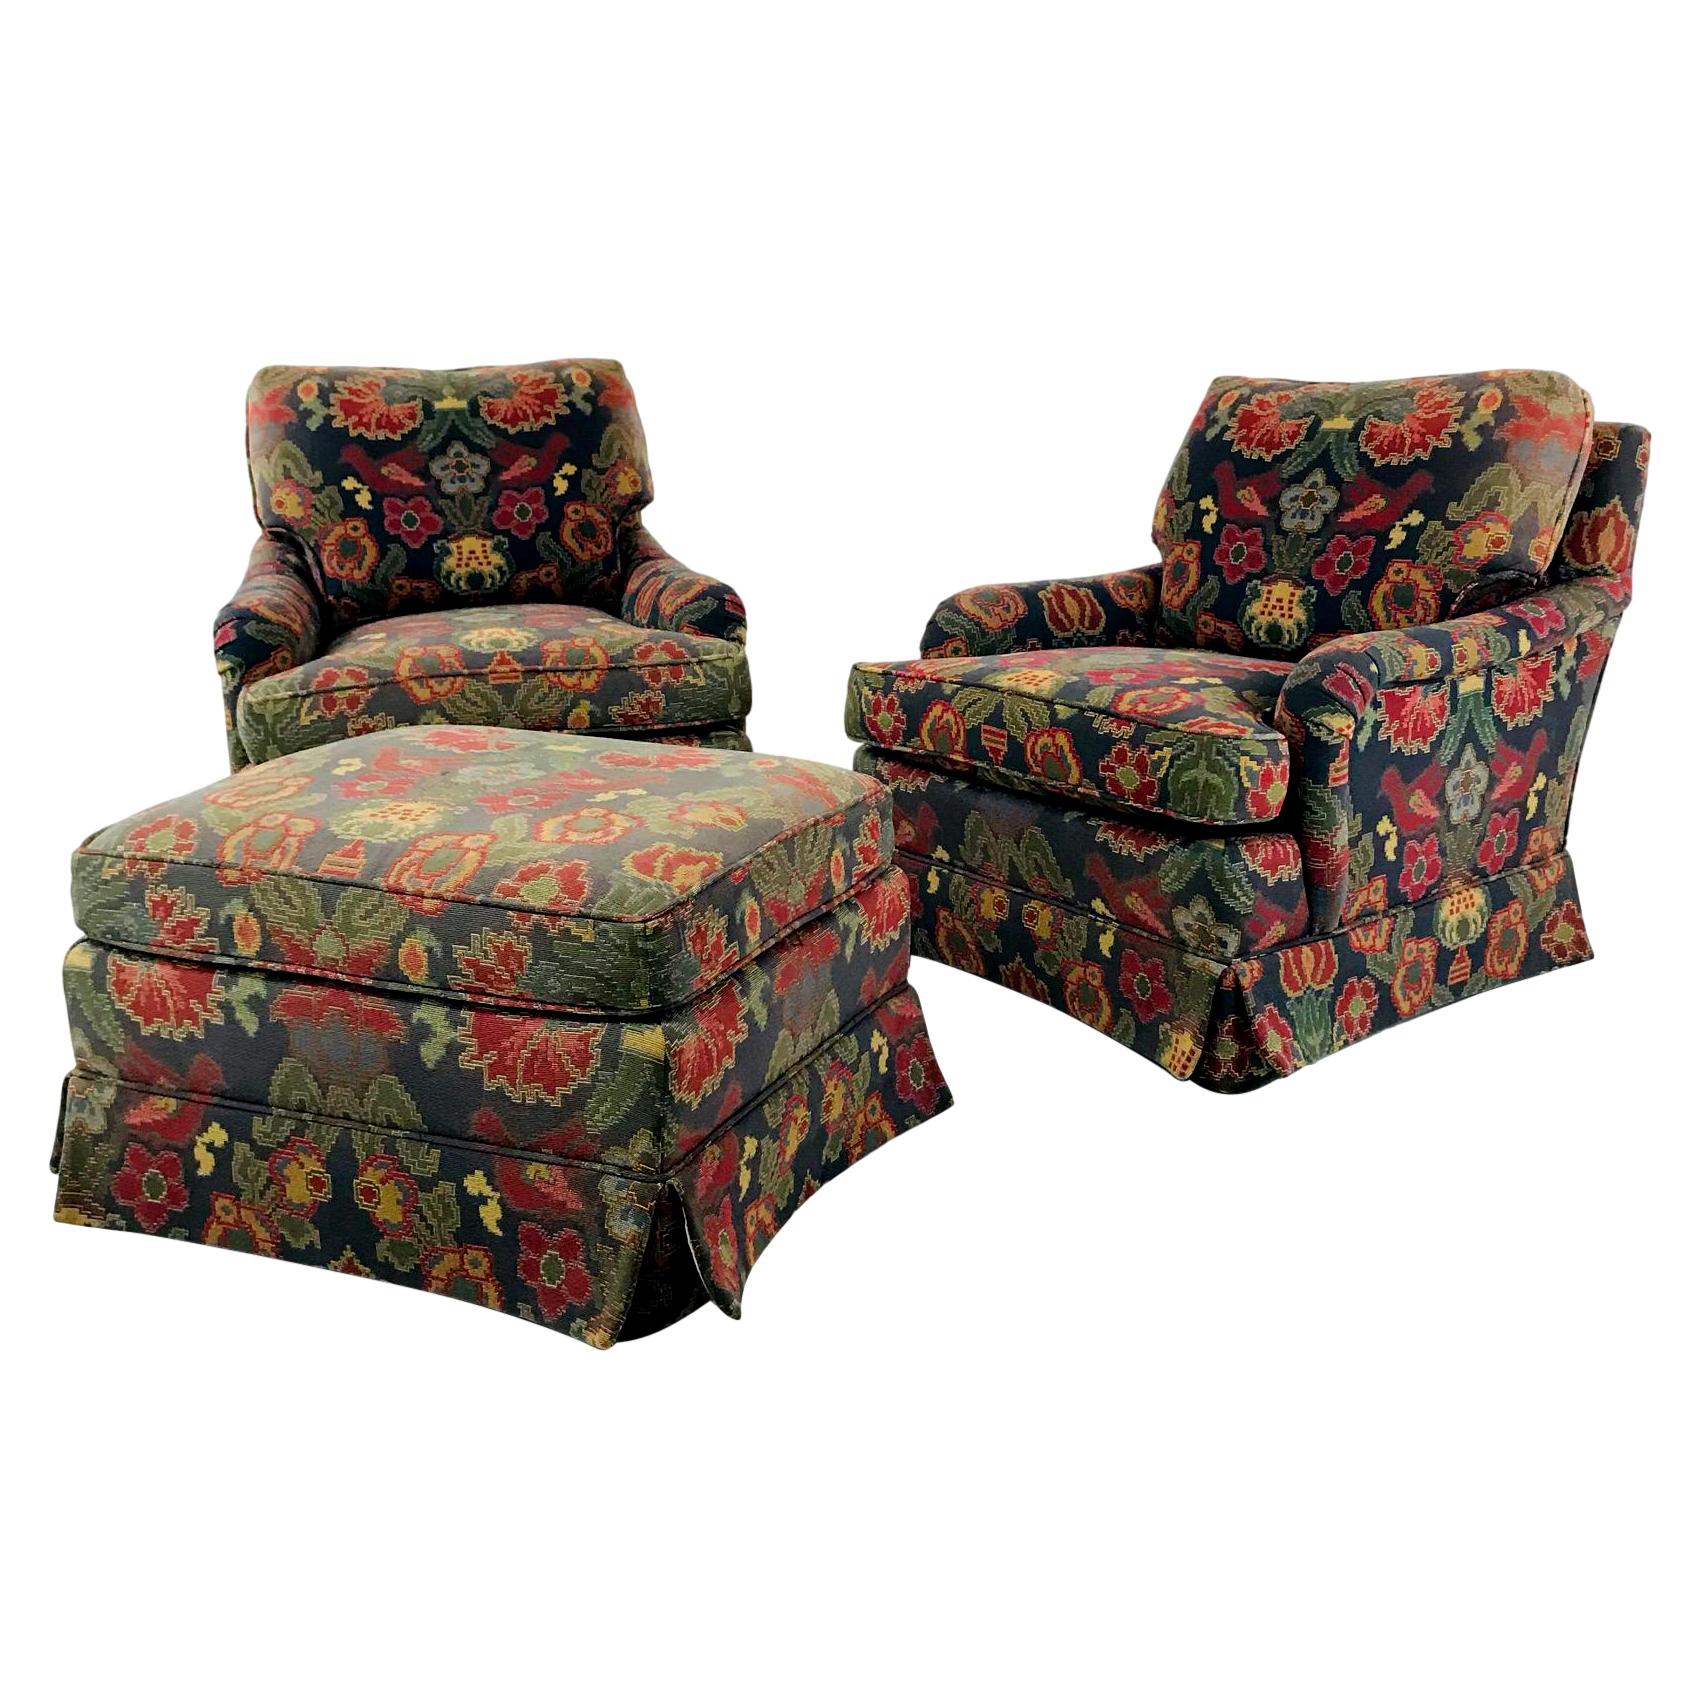 Pair of English Style Lounge Chairs with Ottoman by Baker Furniture Co.